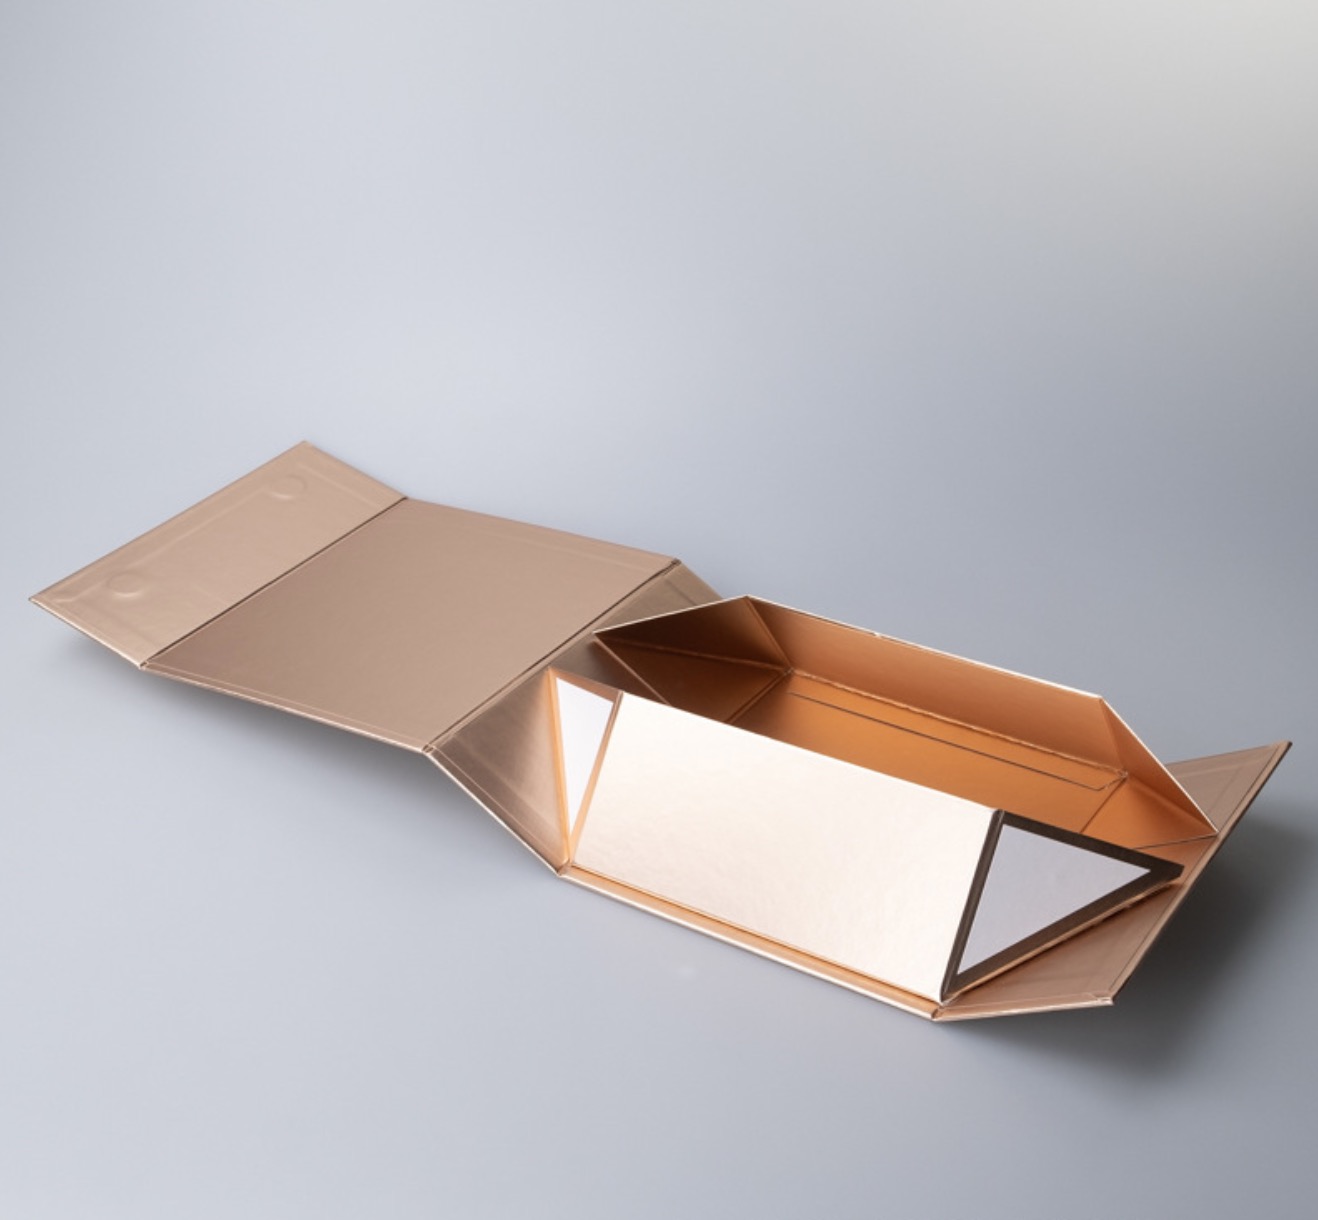 cardboard gift boxes